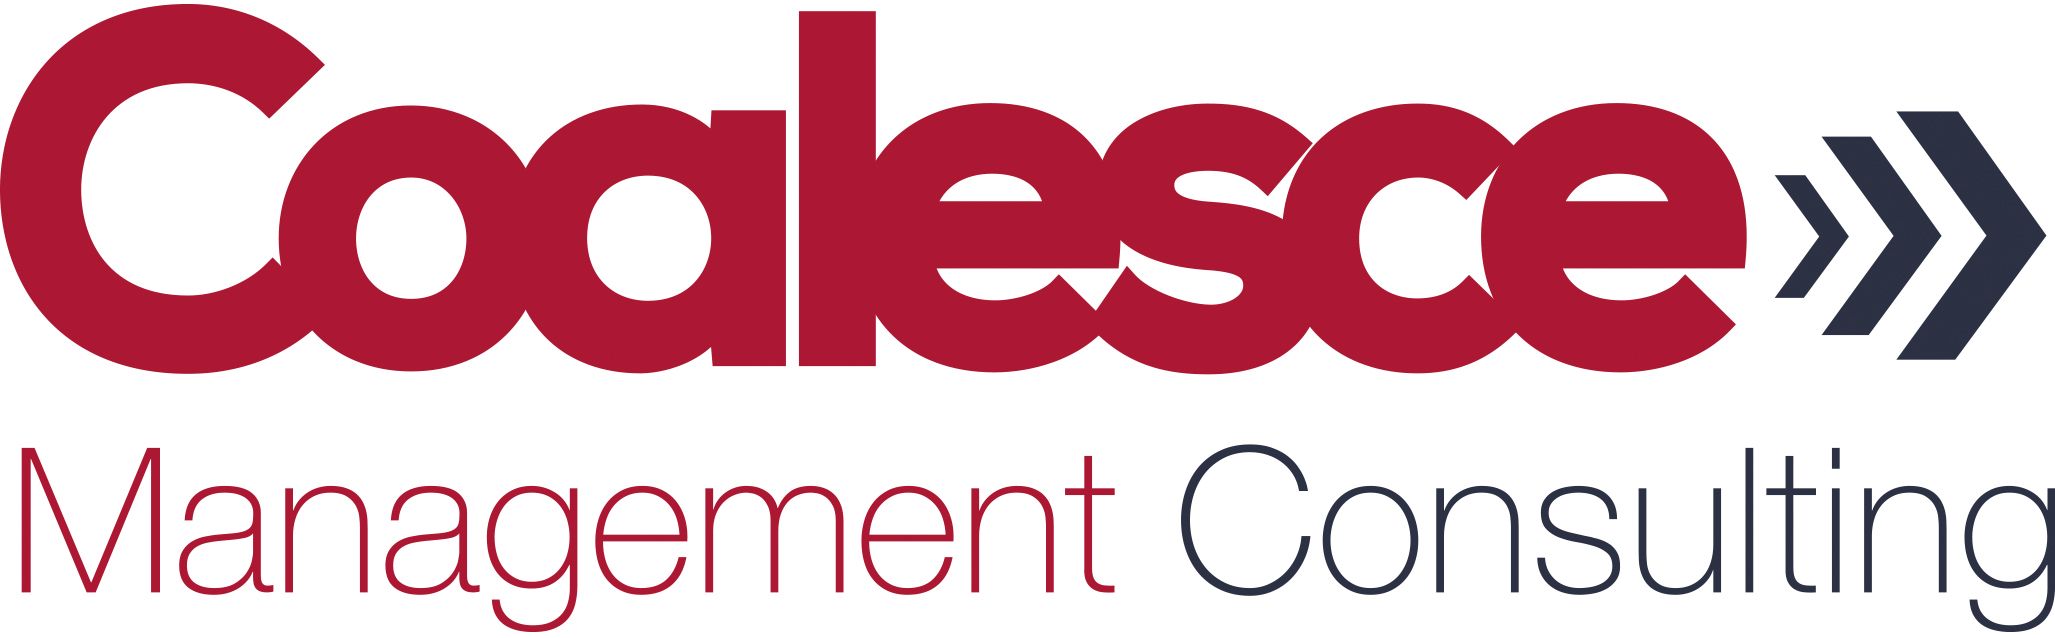 Coalesce Management Consulting